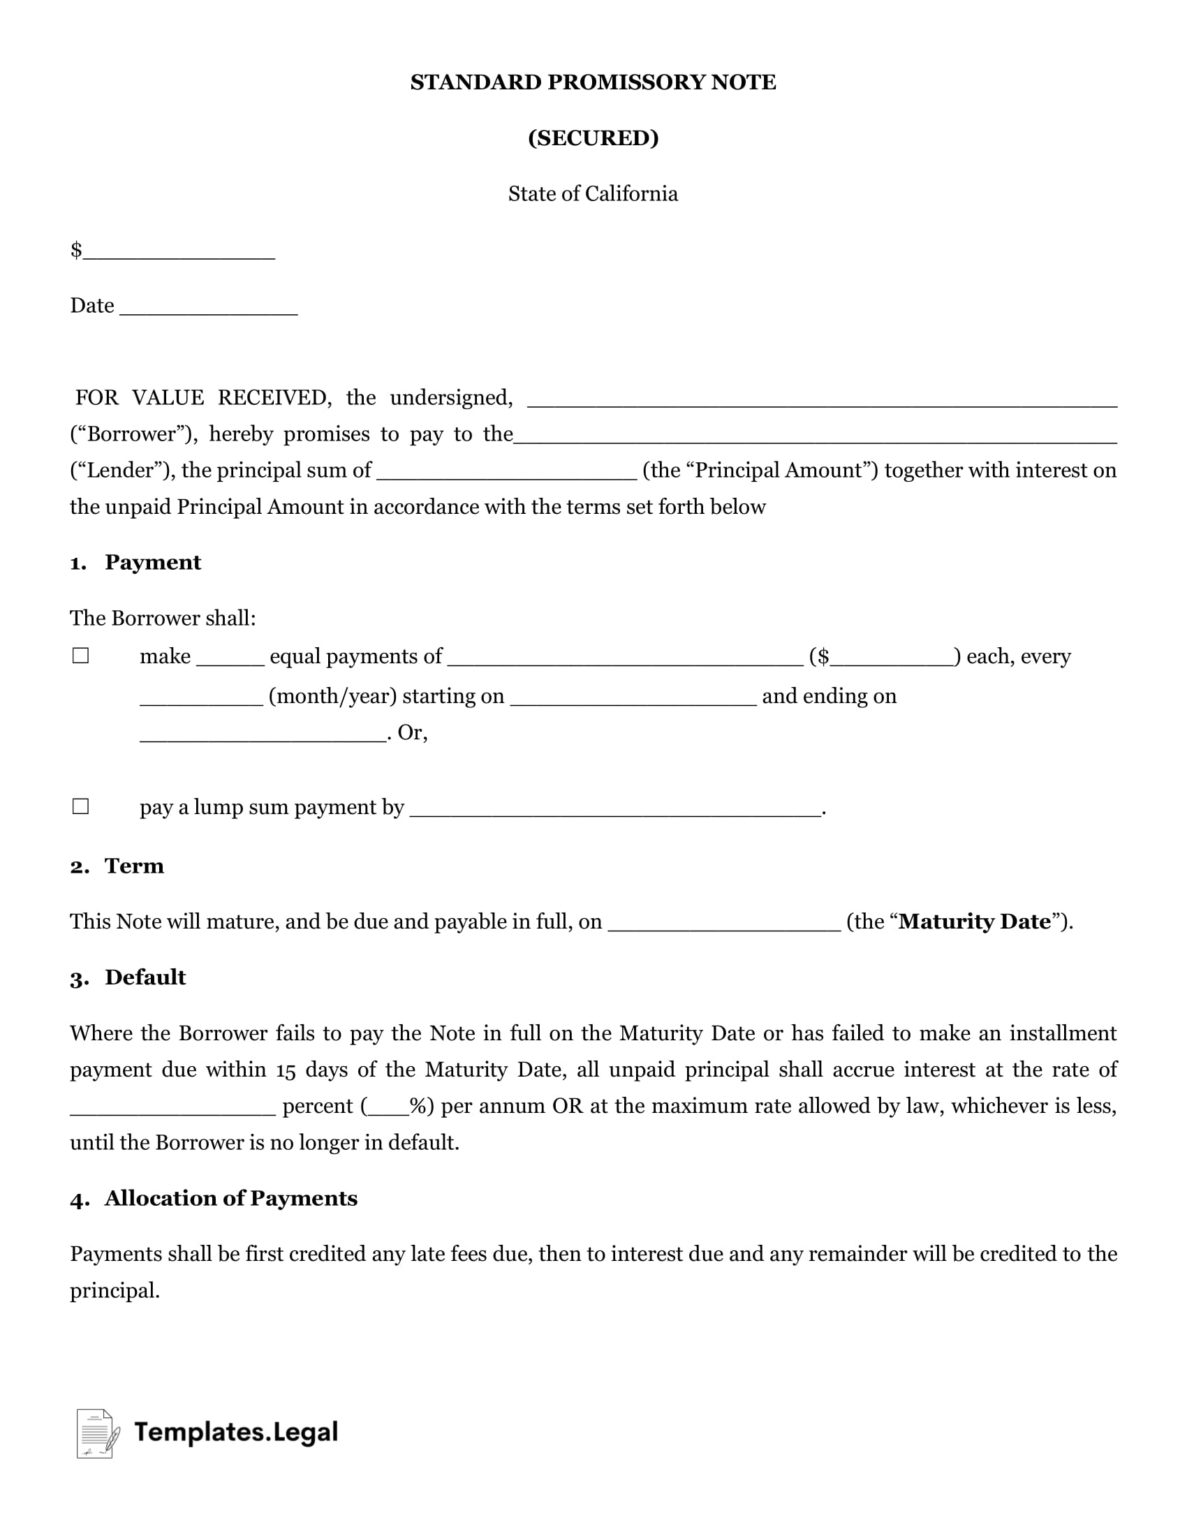 California Promissory Note Templates (Free) [Word, PDF, ODT]